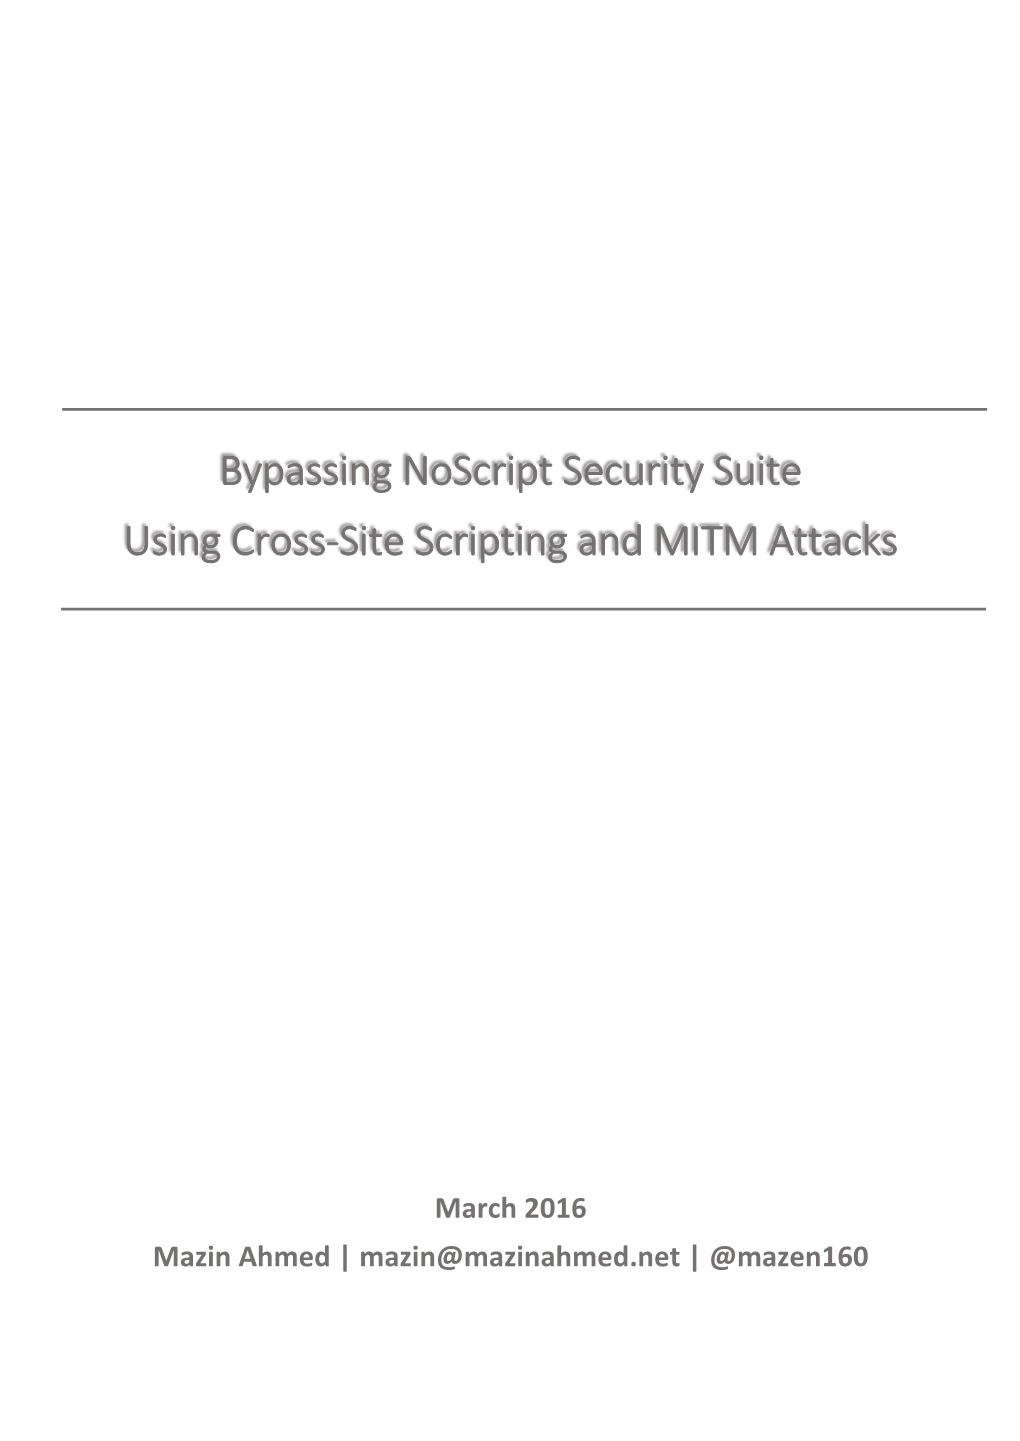 [Paper] Bypassing Noscript Security Suite Using Cross-Site Scripting and MITM Attacks